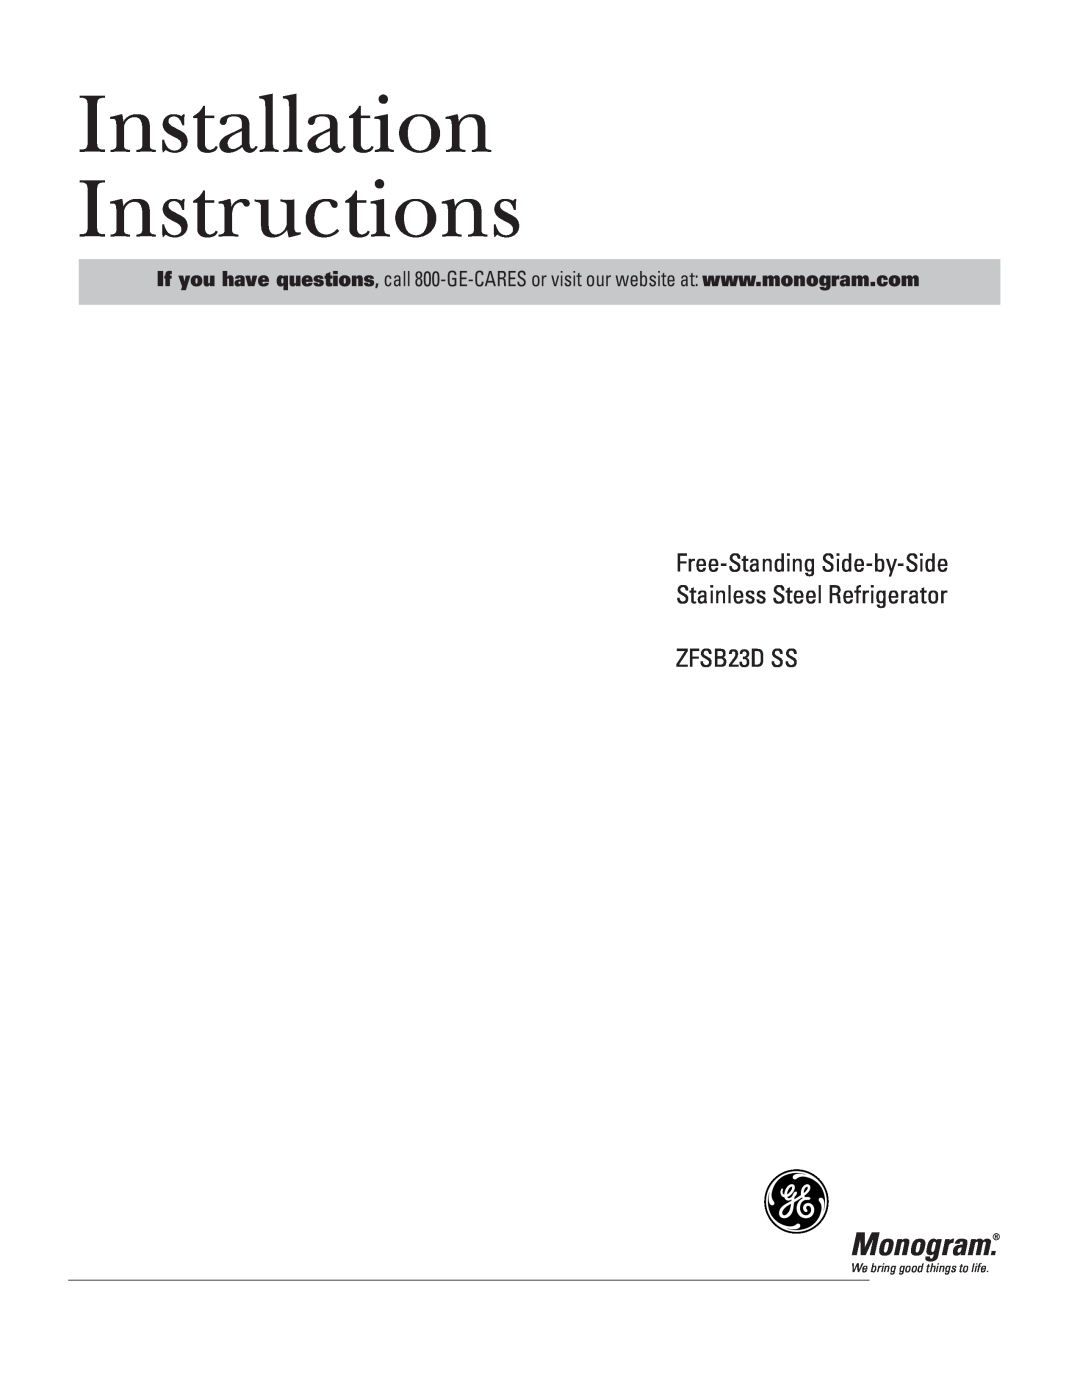 GE ZFSB23D SS installation instructions Monogram, Installation Instructions, Free-Standing Side-by-Side 